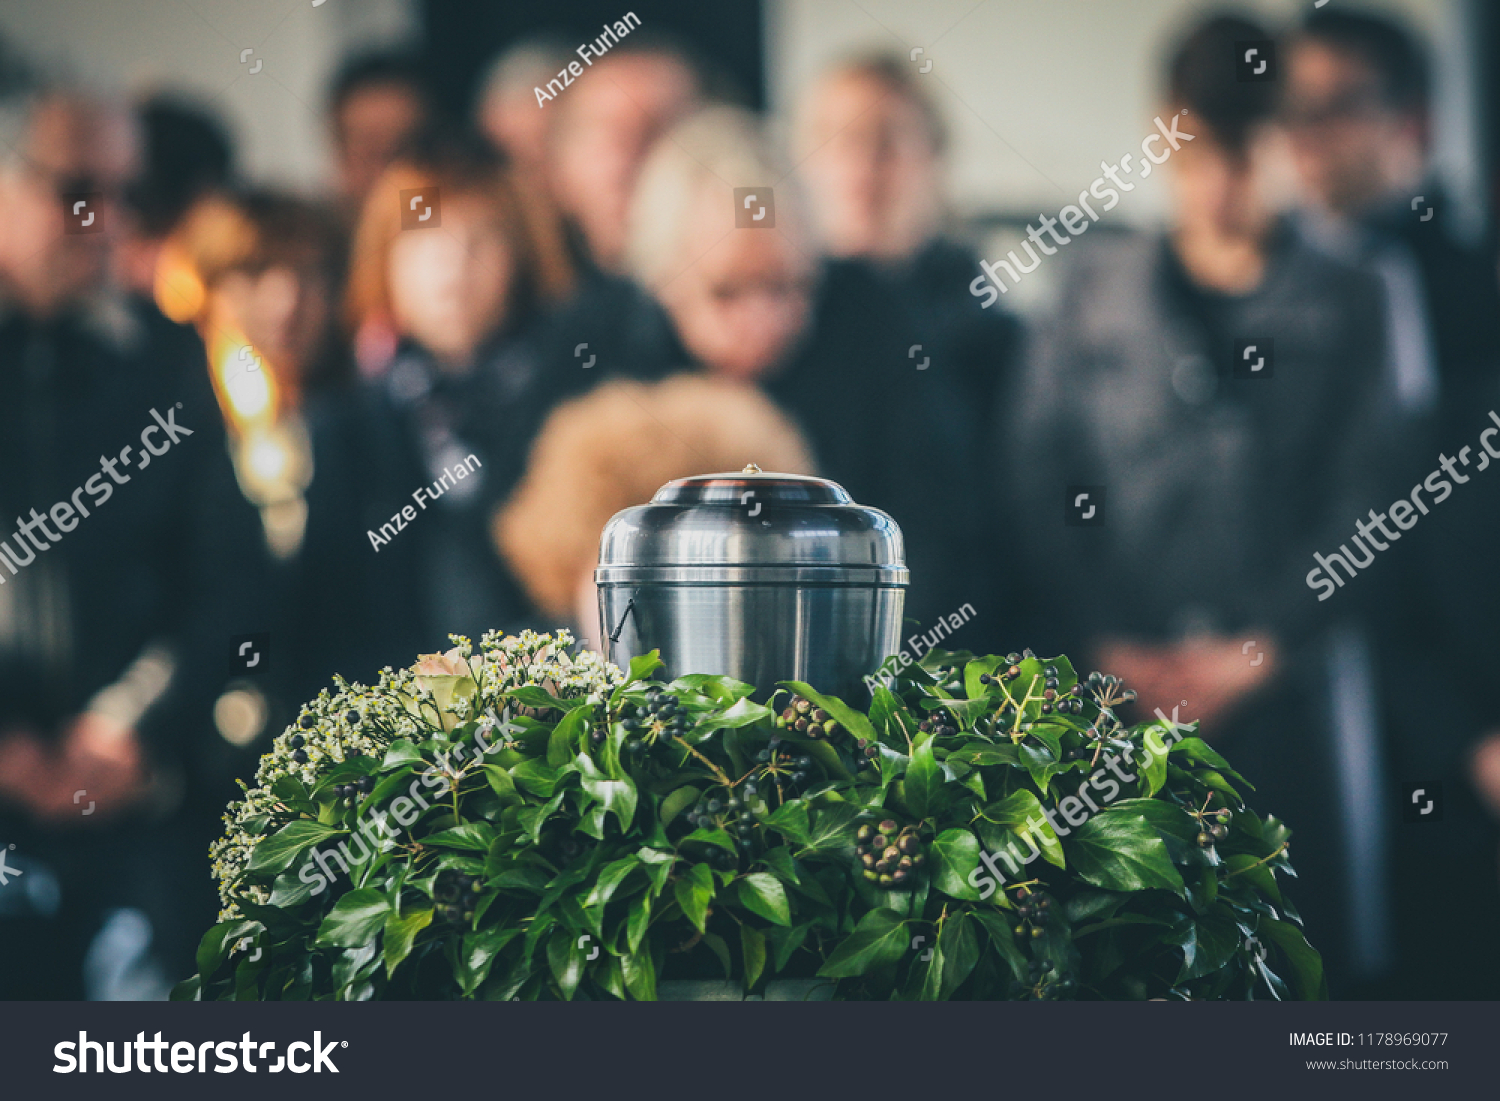 A metal urn with ashes of a dead person on a funeral, with people mourning in the background on a memorial service. Sad grieving moment at the end of a life. Last farewell to a person in an urn. #1178969077